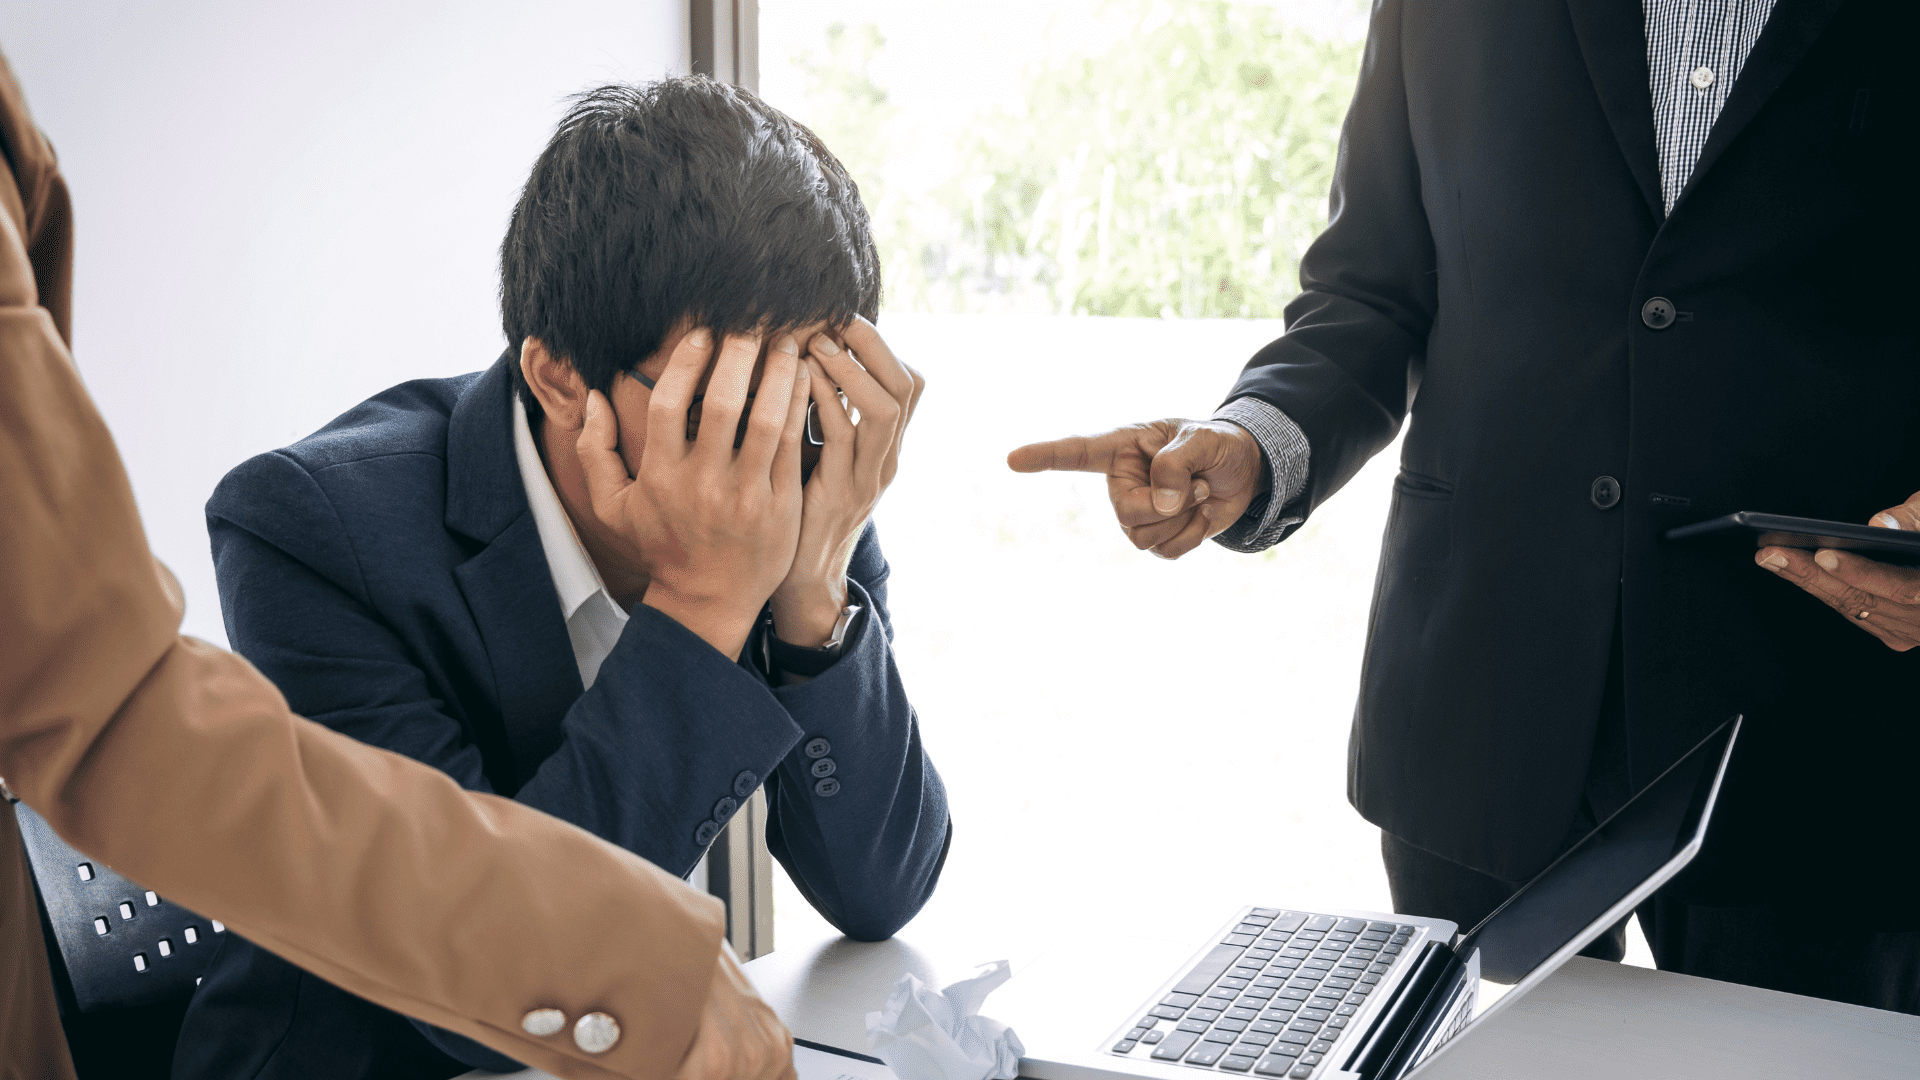 How to Deal With a Coworker That Insults You at Work